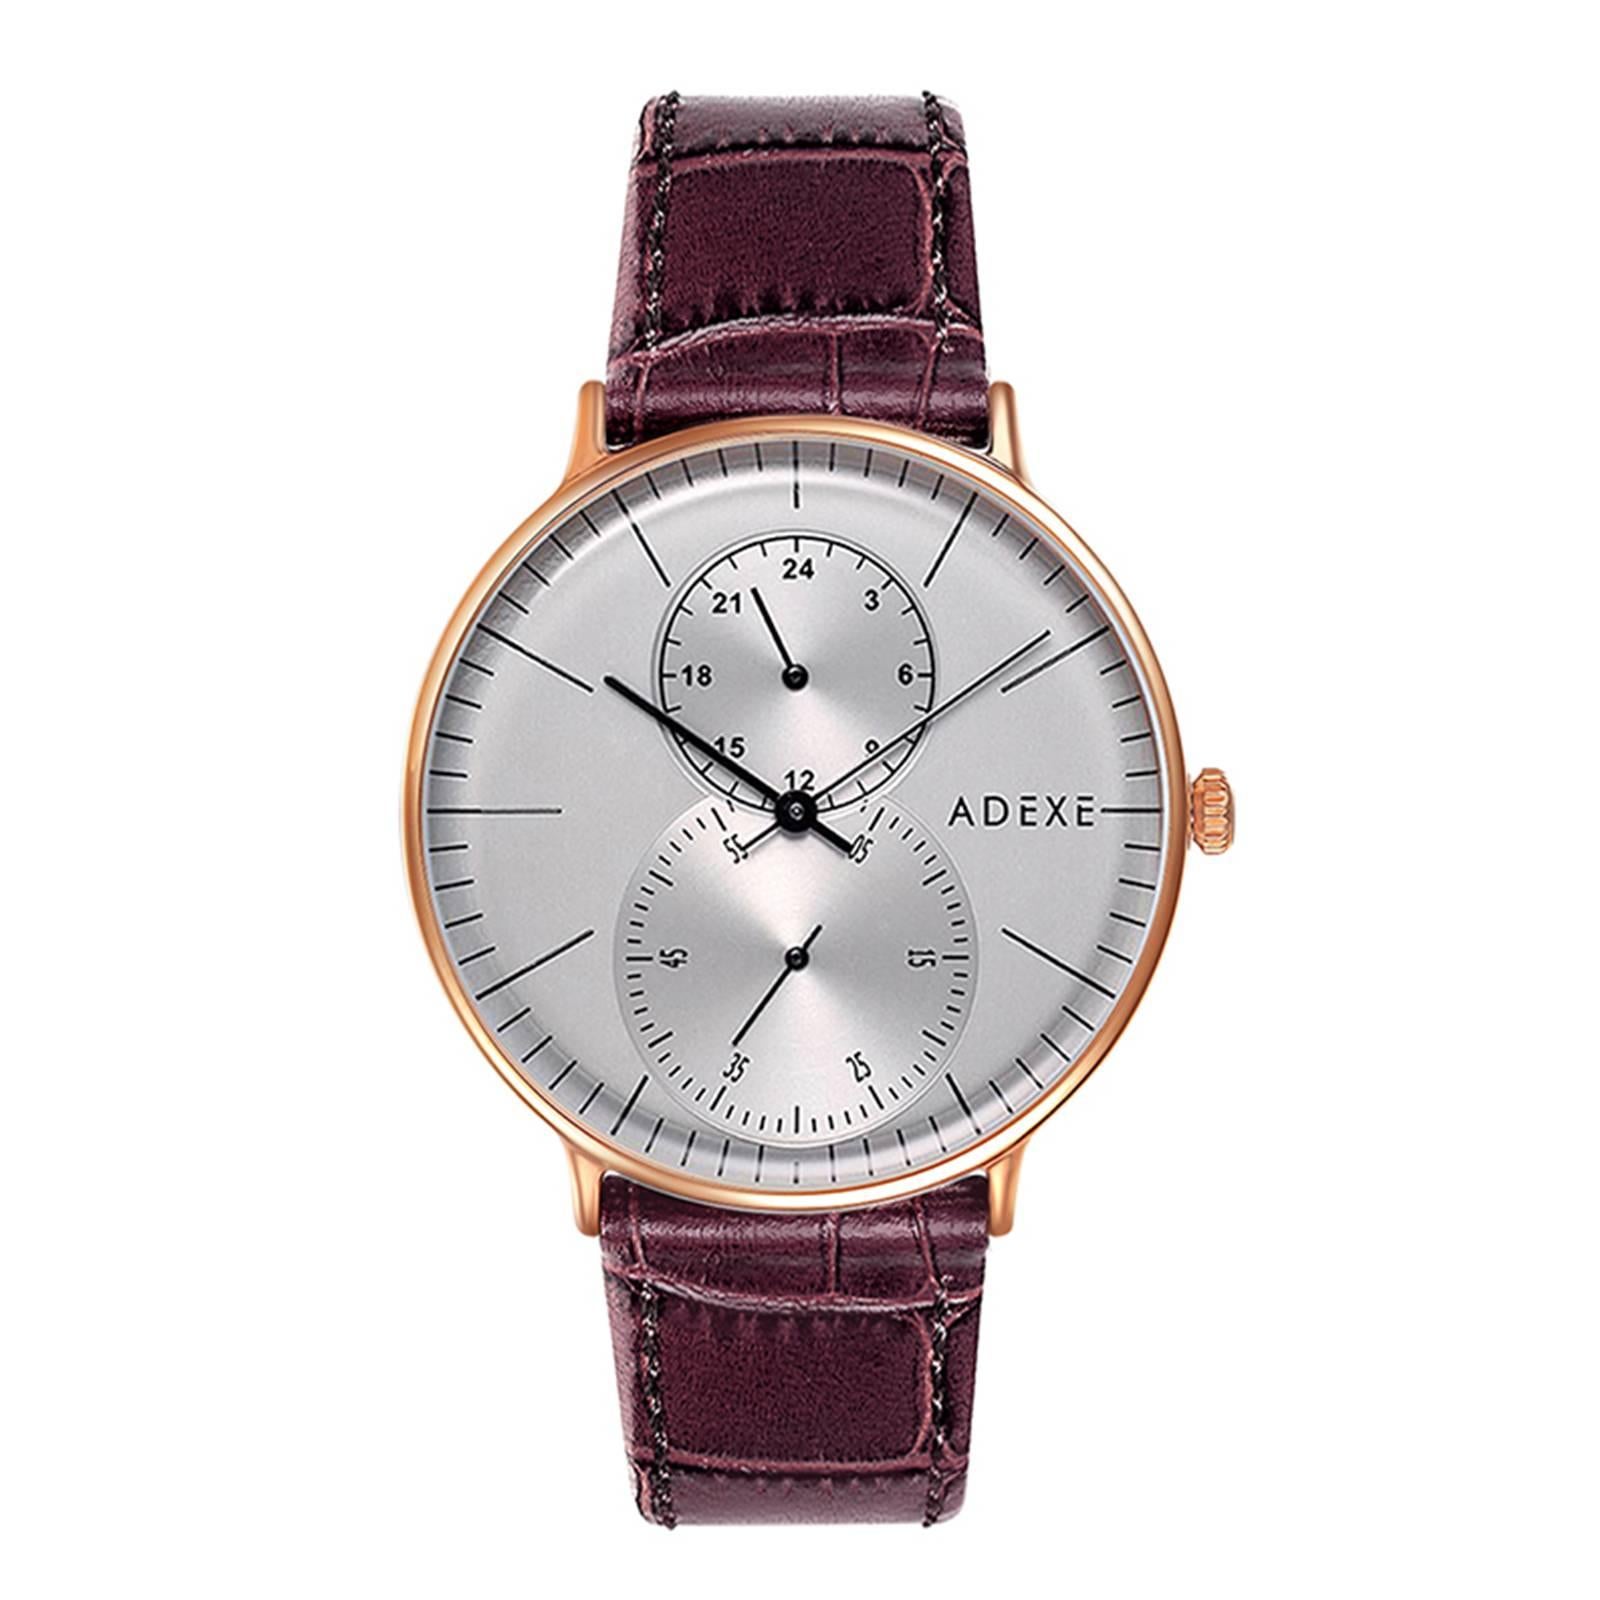 ADEXE Watches Foreseer Grey & Dark Brown Contemporary WristWatch  For Sale